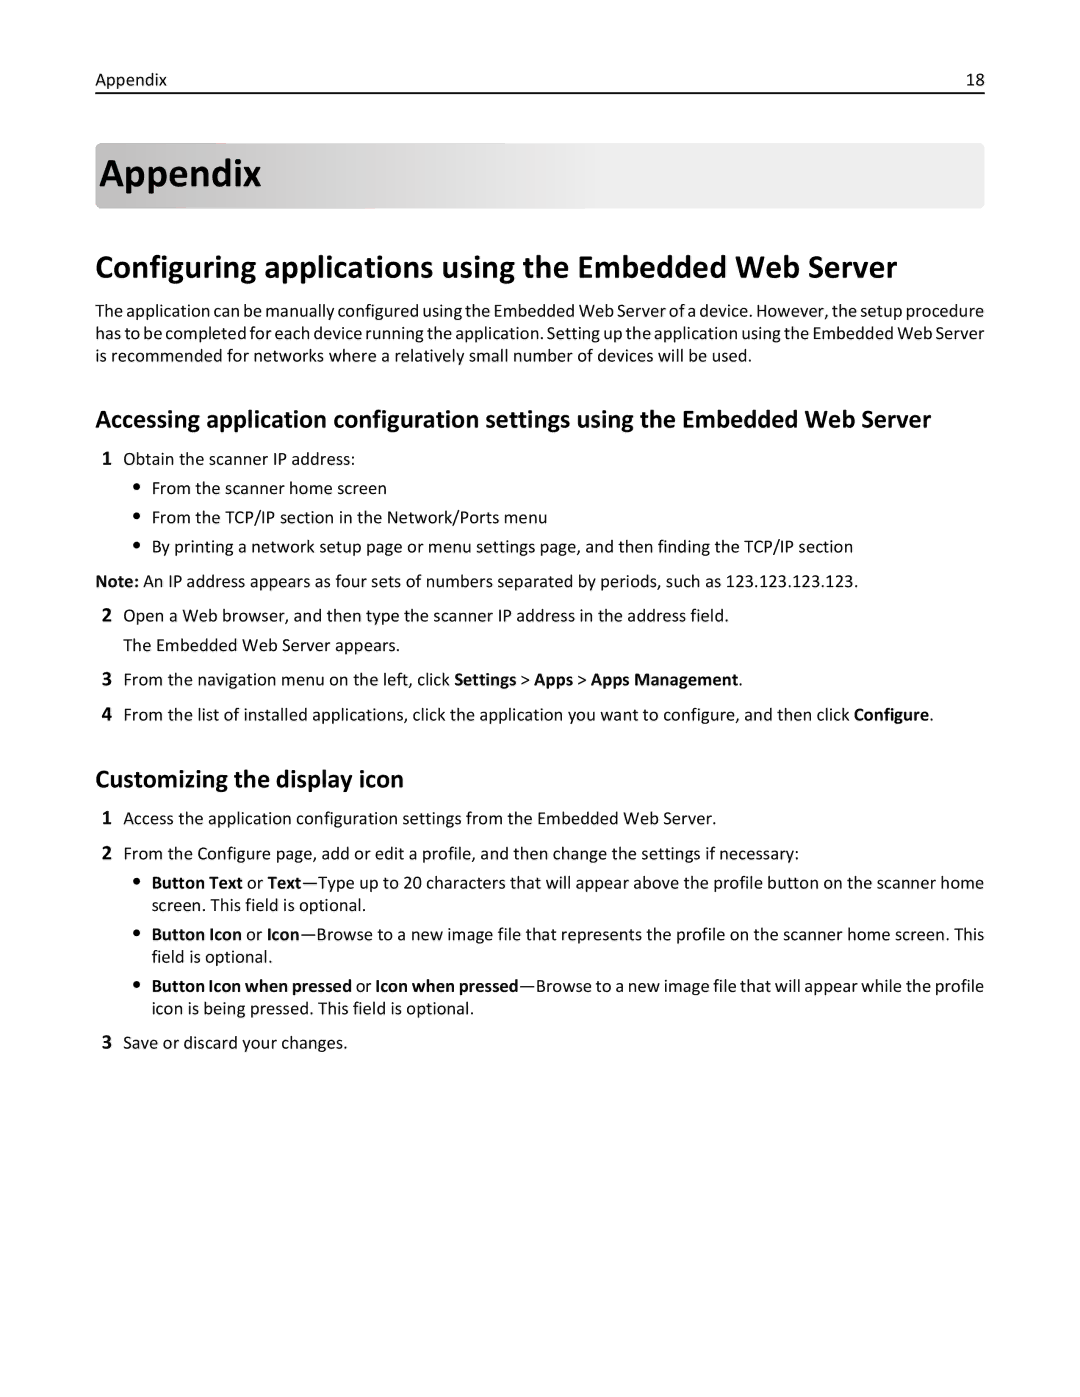 Lexmark MX6500E manual Appendix, Configuring applications using the Embedded Web Server, Customizing the display icon 